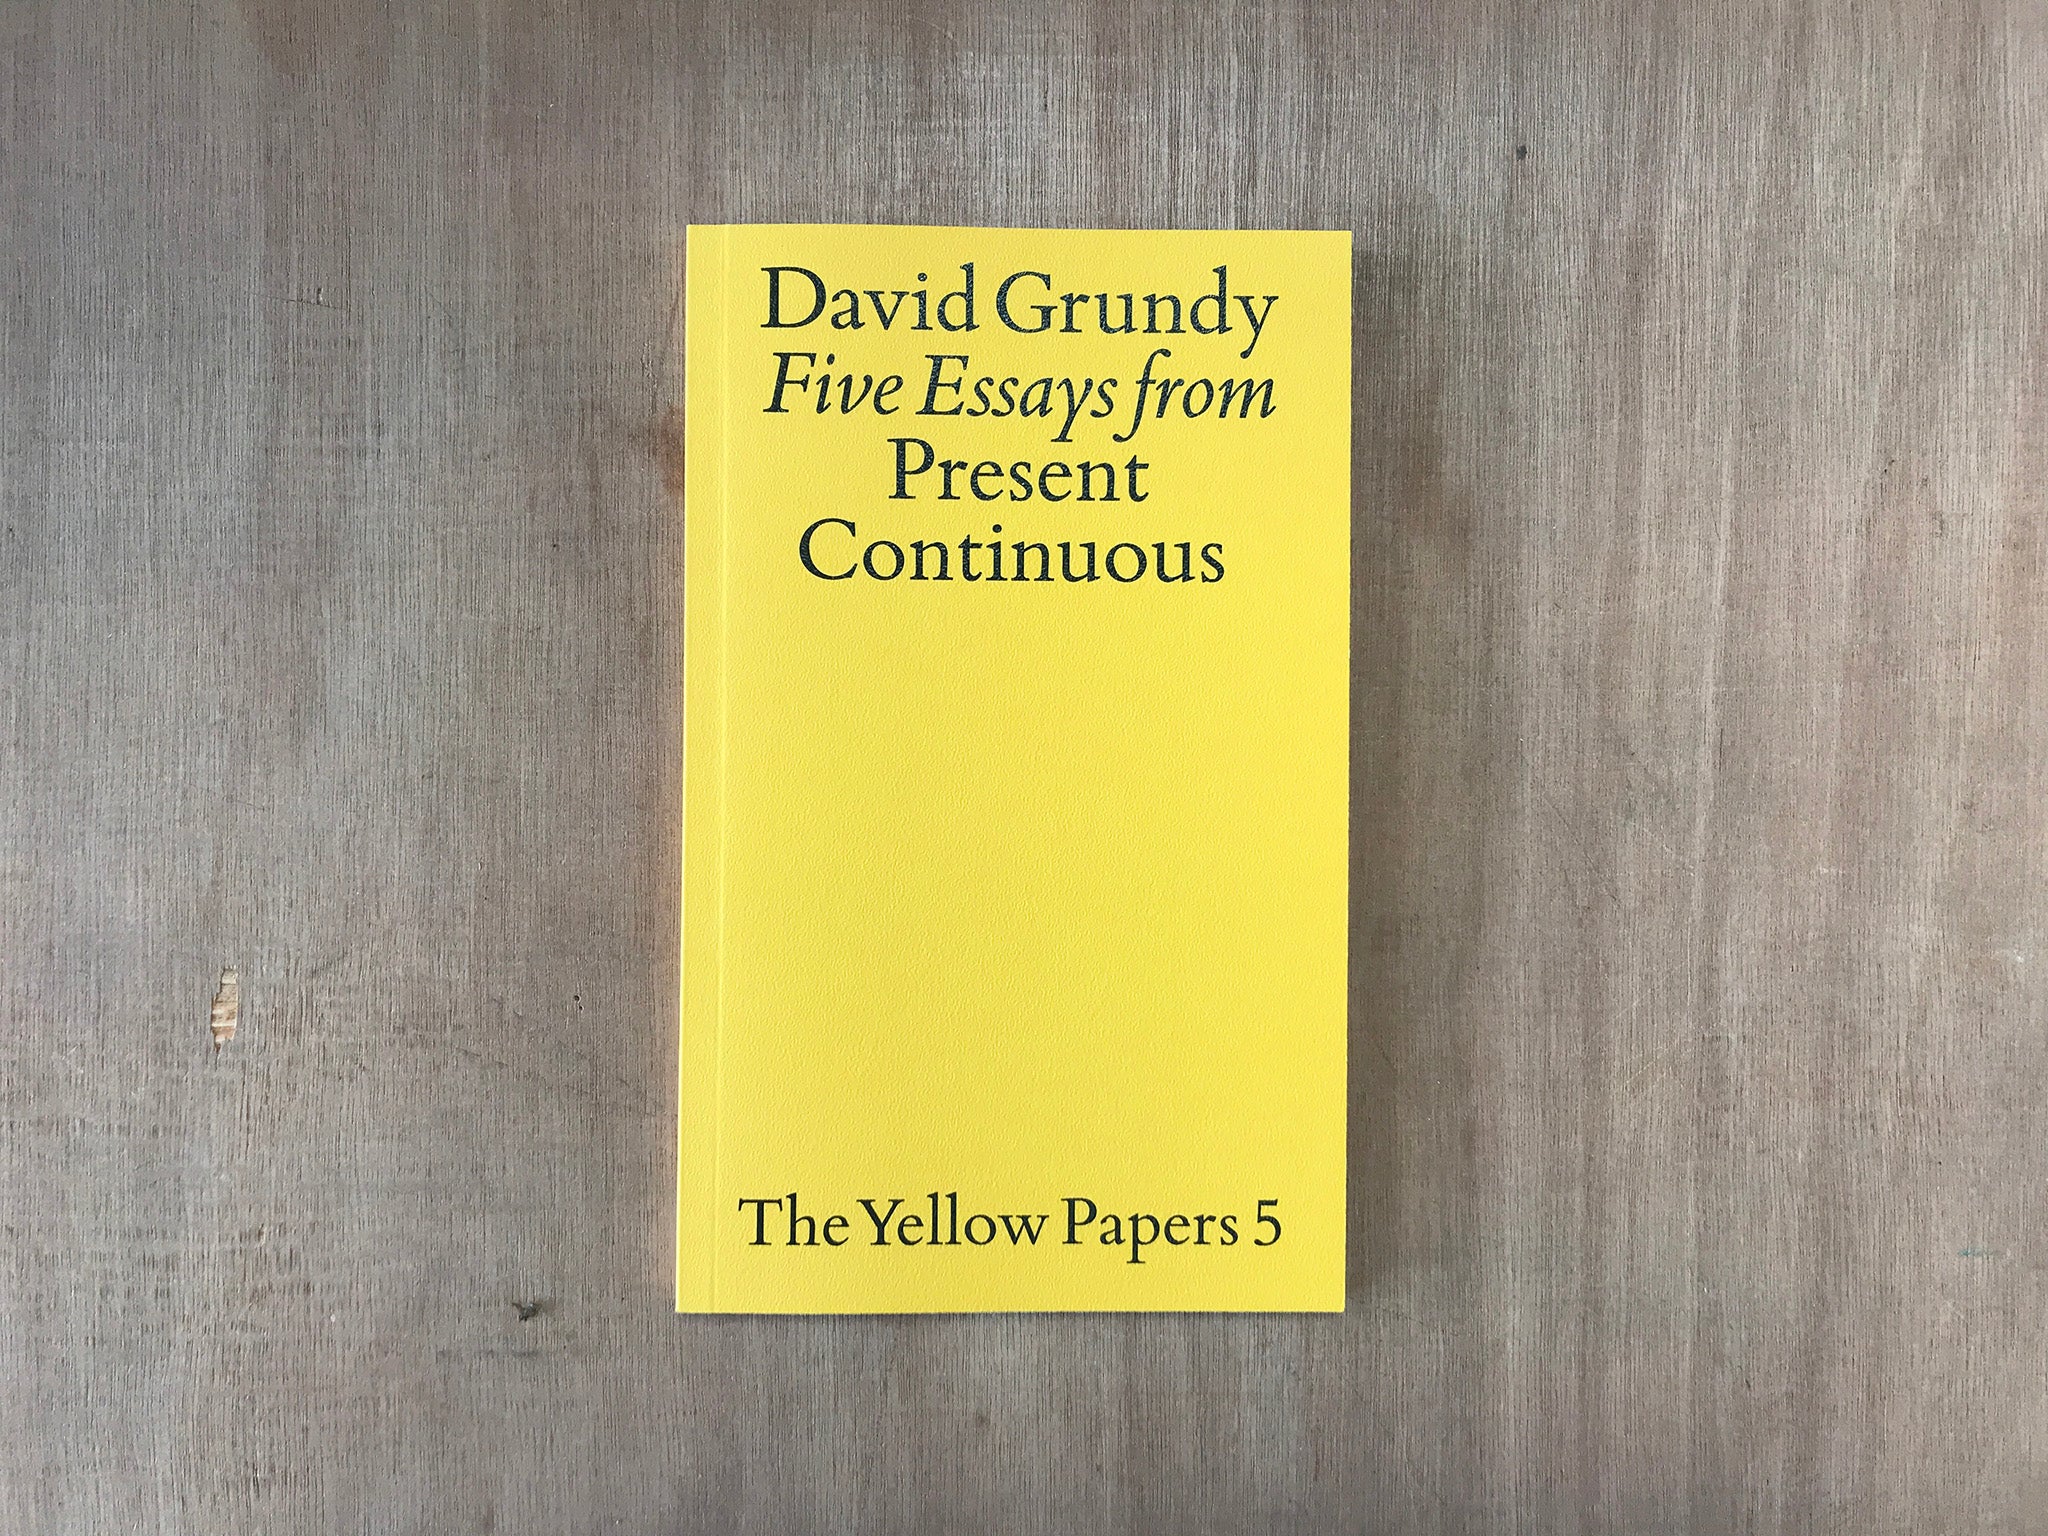 THE YELLOW PAPERS 5: FIVE ESSAYS FROM PRESENT CONTINUOUS by David Grundy